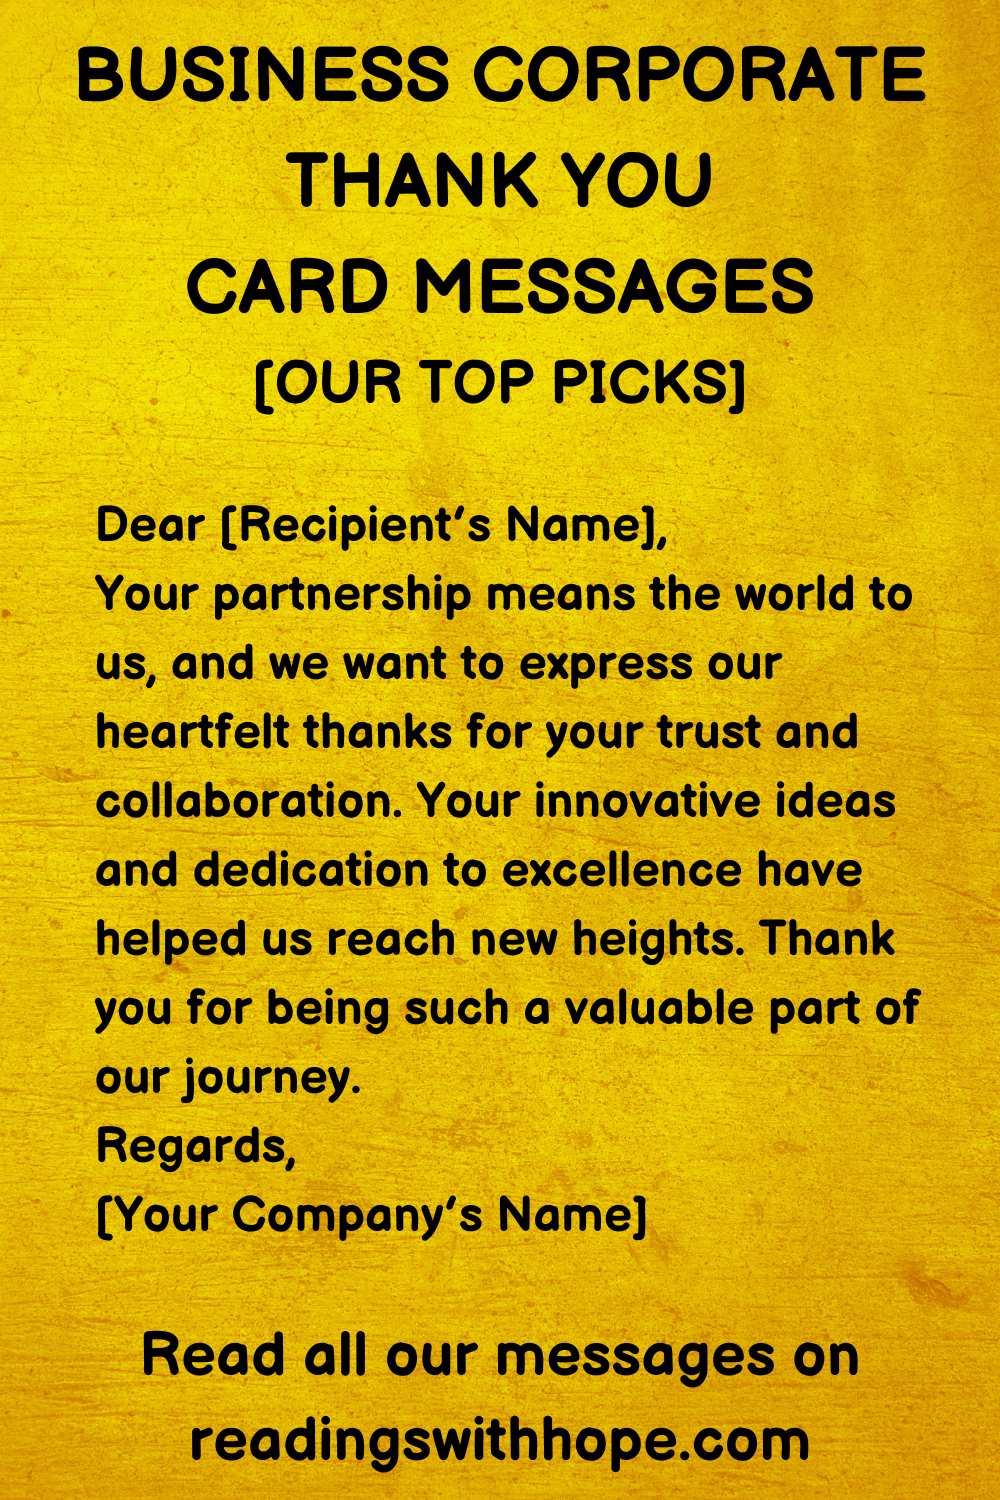 Best Business Corporate Thank You Card Messages
